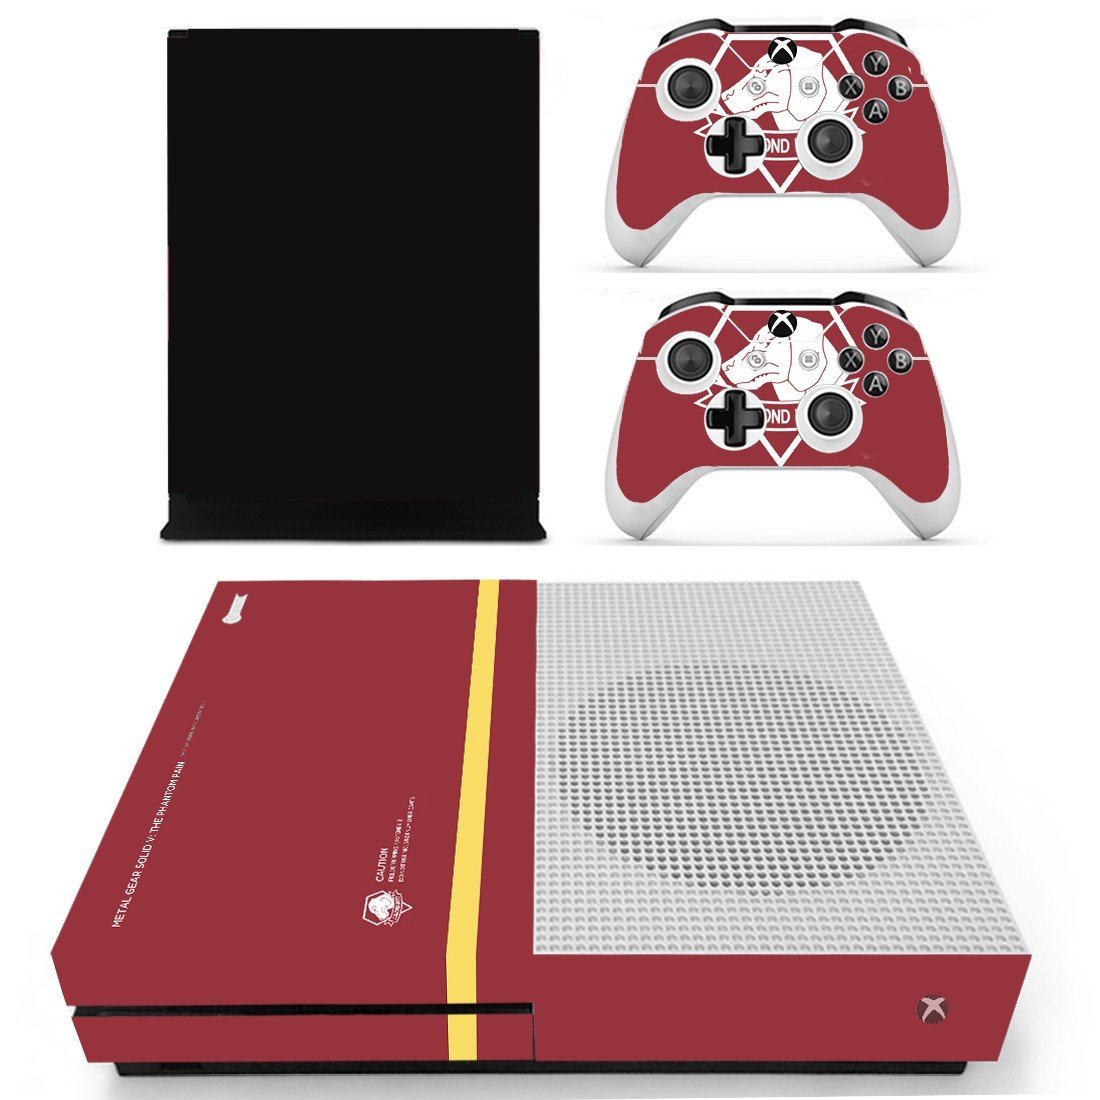 Xbox One S Skin Cover - Metal Gear Solid 5